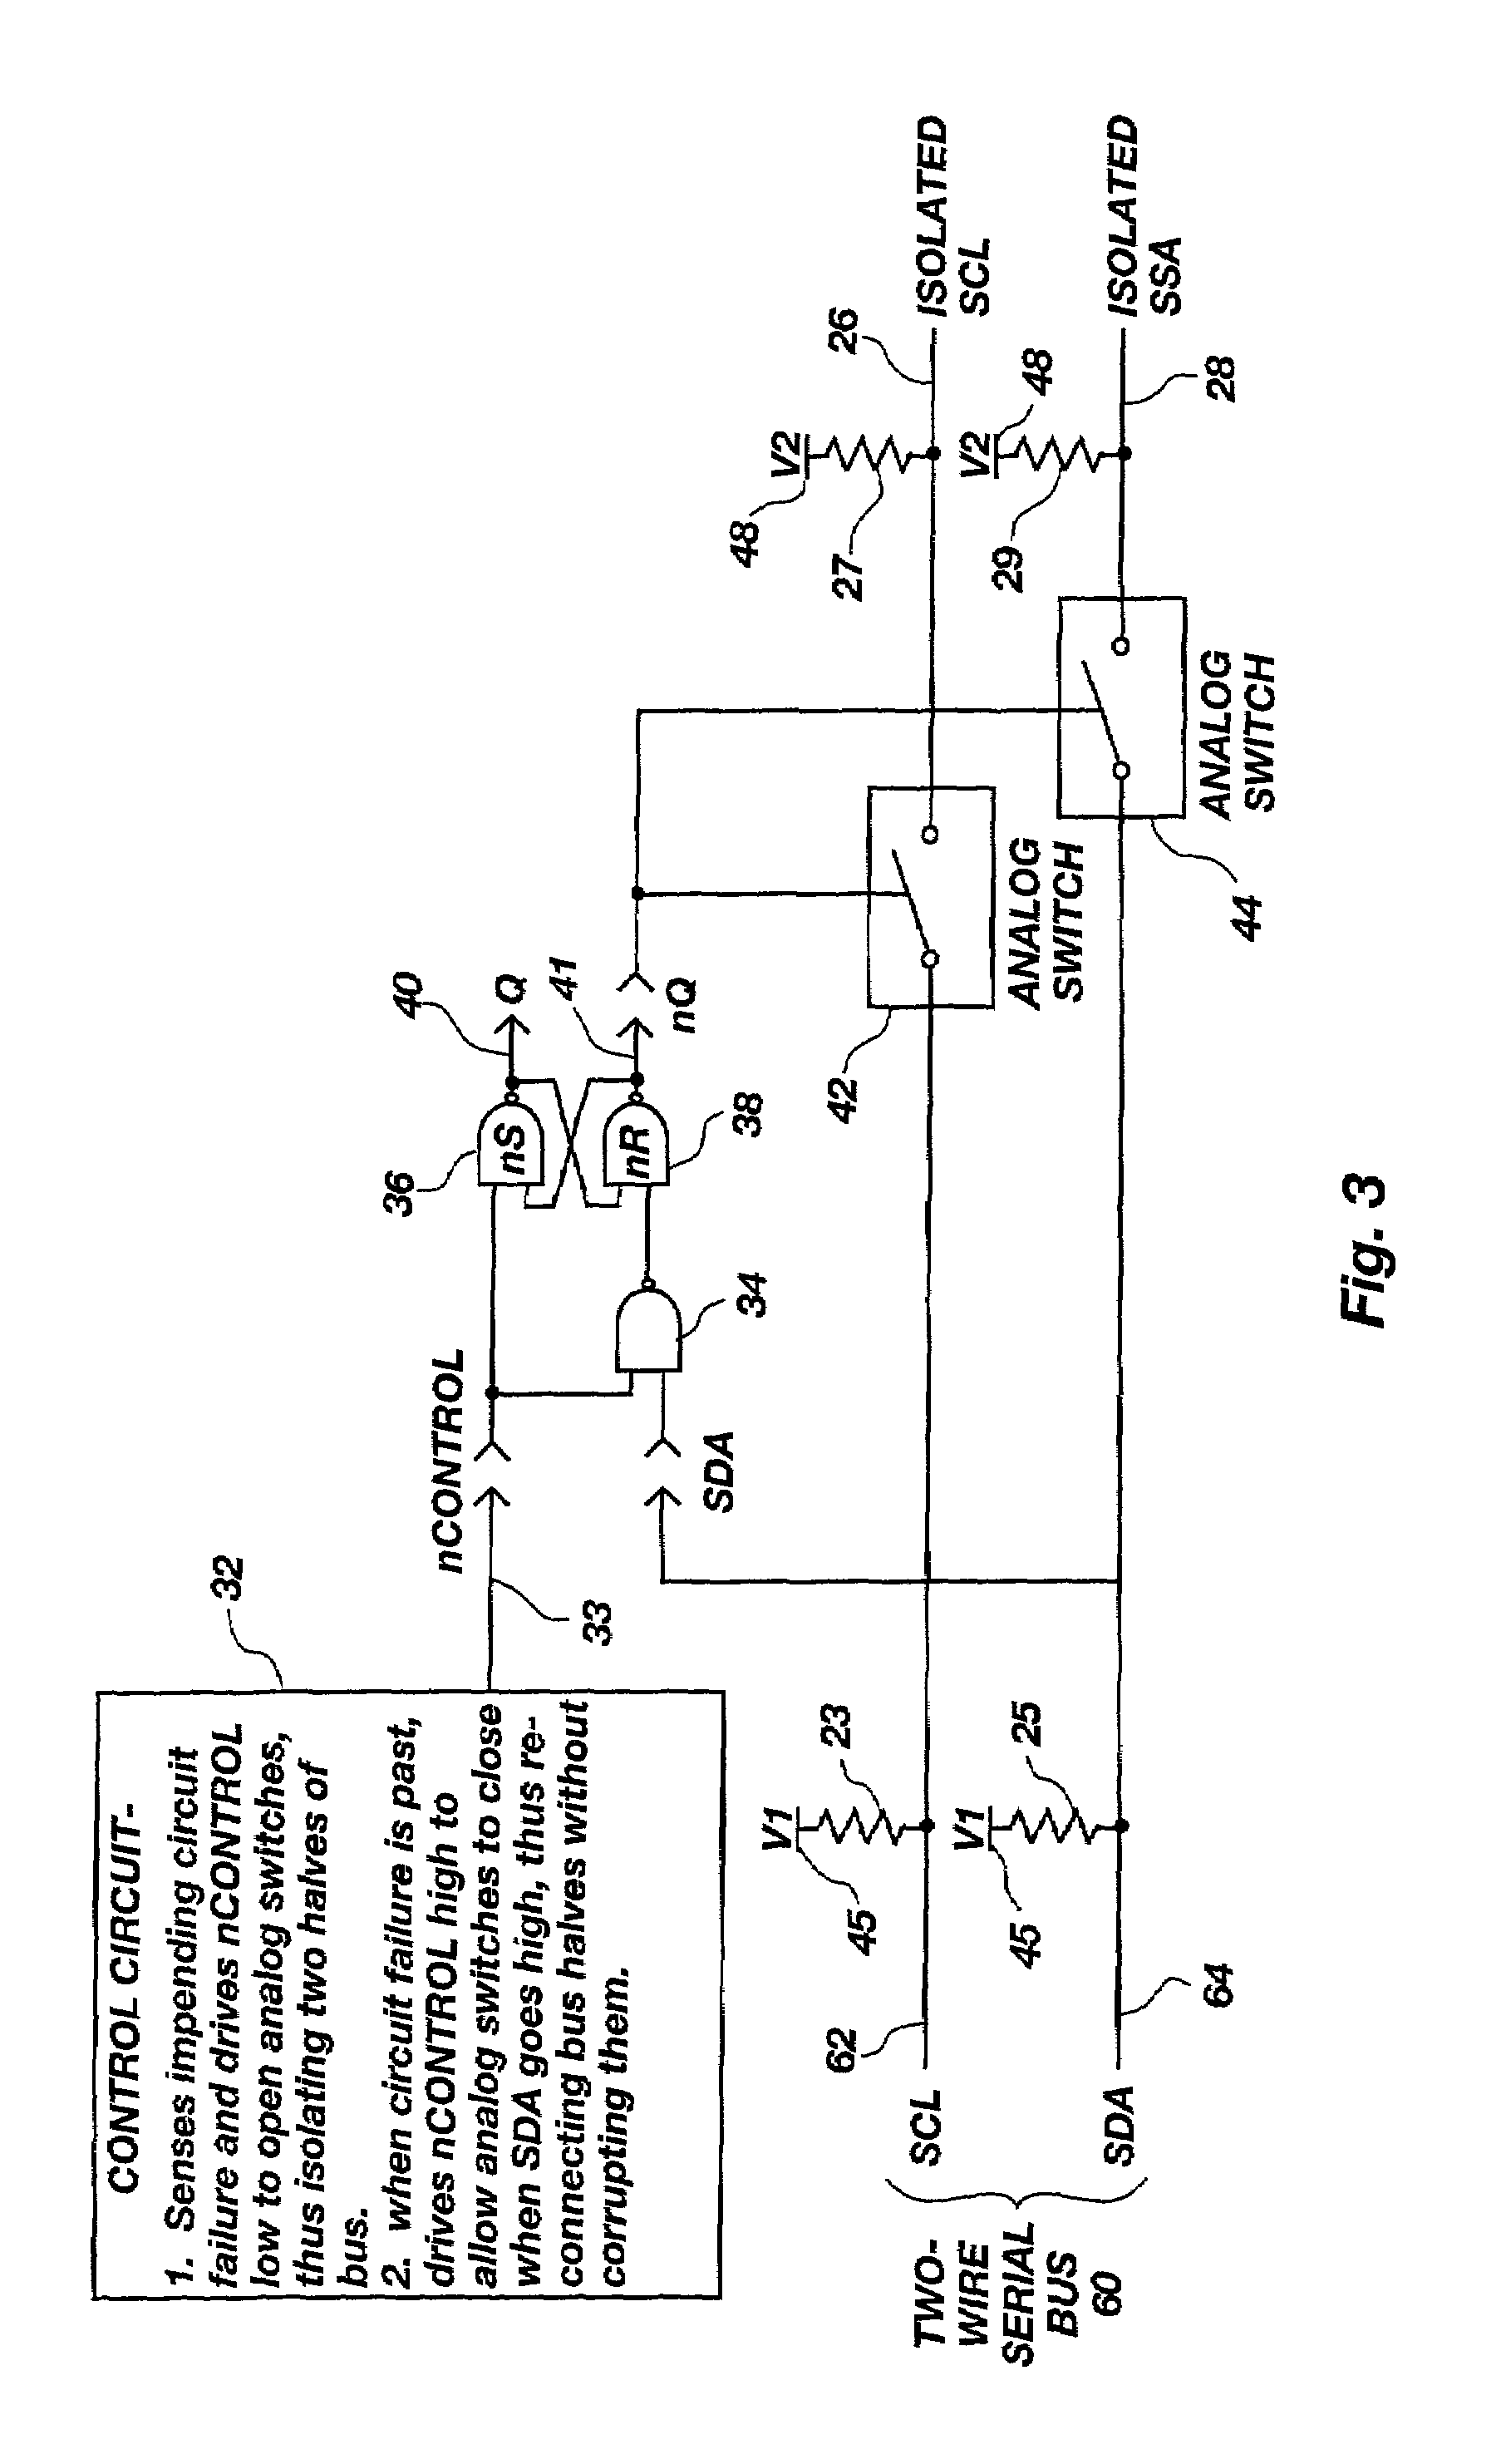 Method and apparatus for connecting devices to a bus